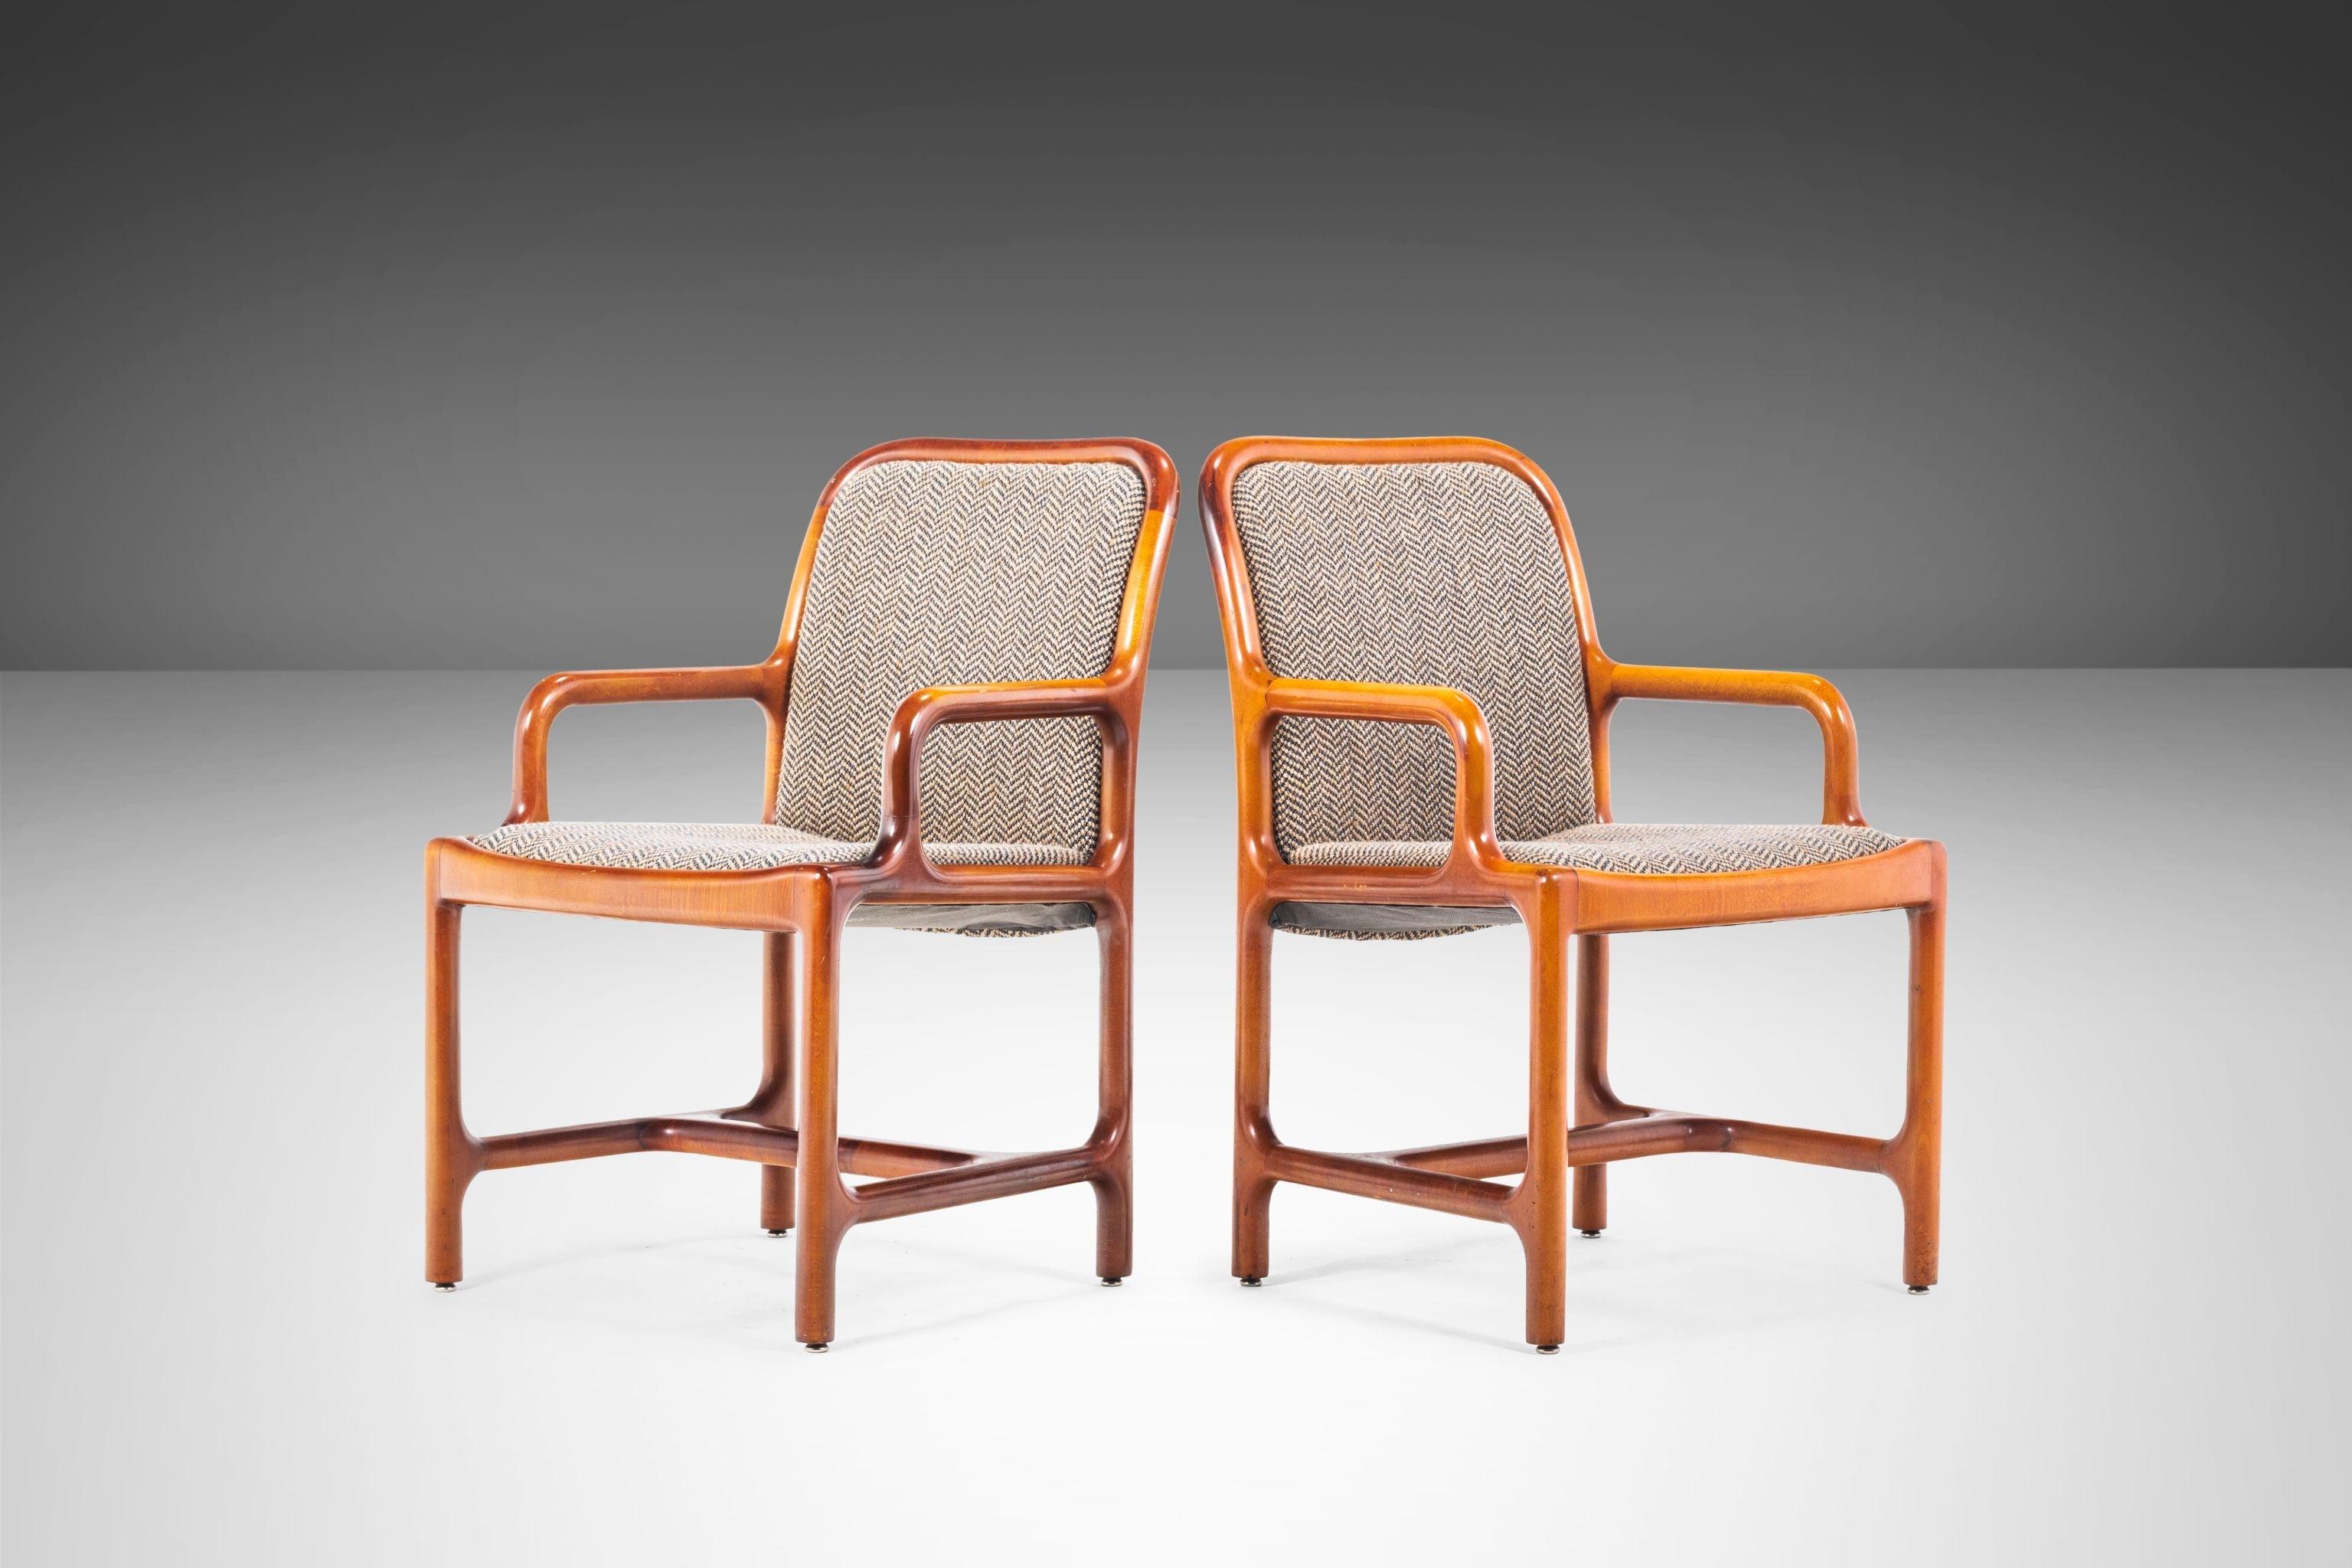 Set of Four (4) Pretzel Chairs in Oak and Original Tweed Fabric, USA, c. 1960's For Sale 1